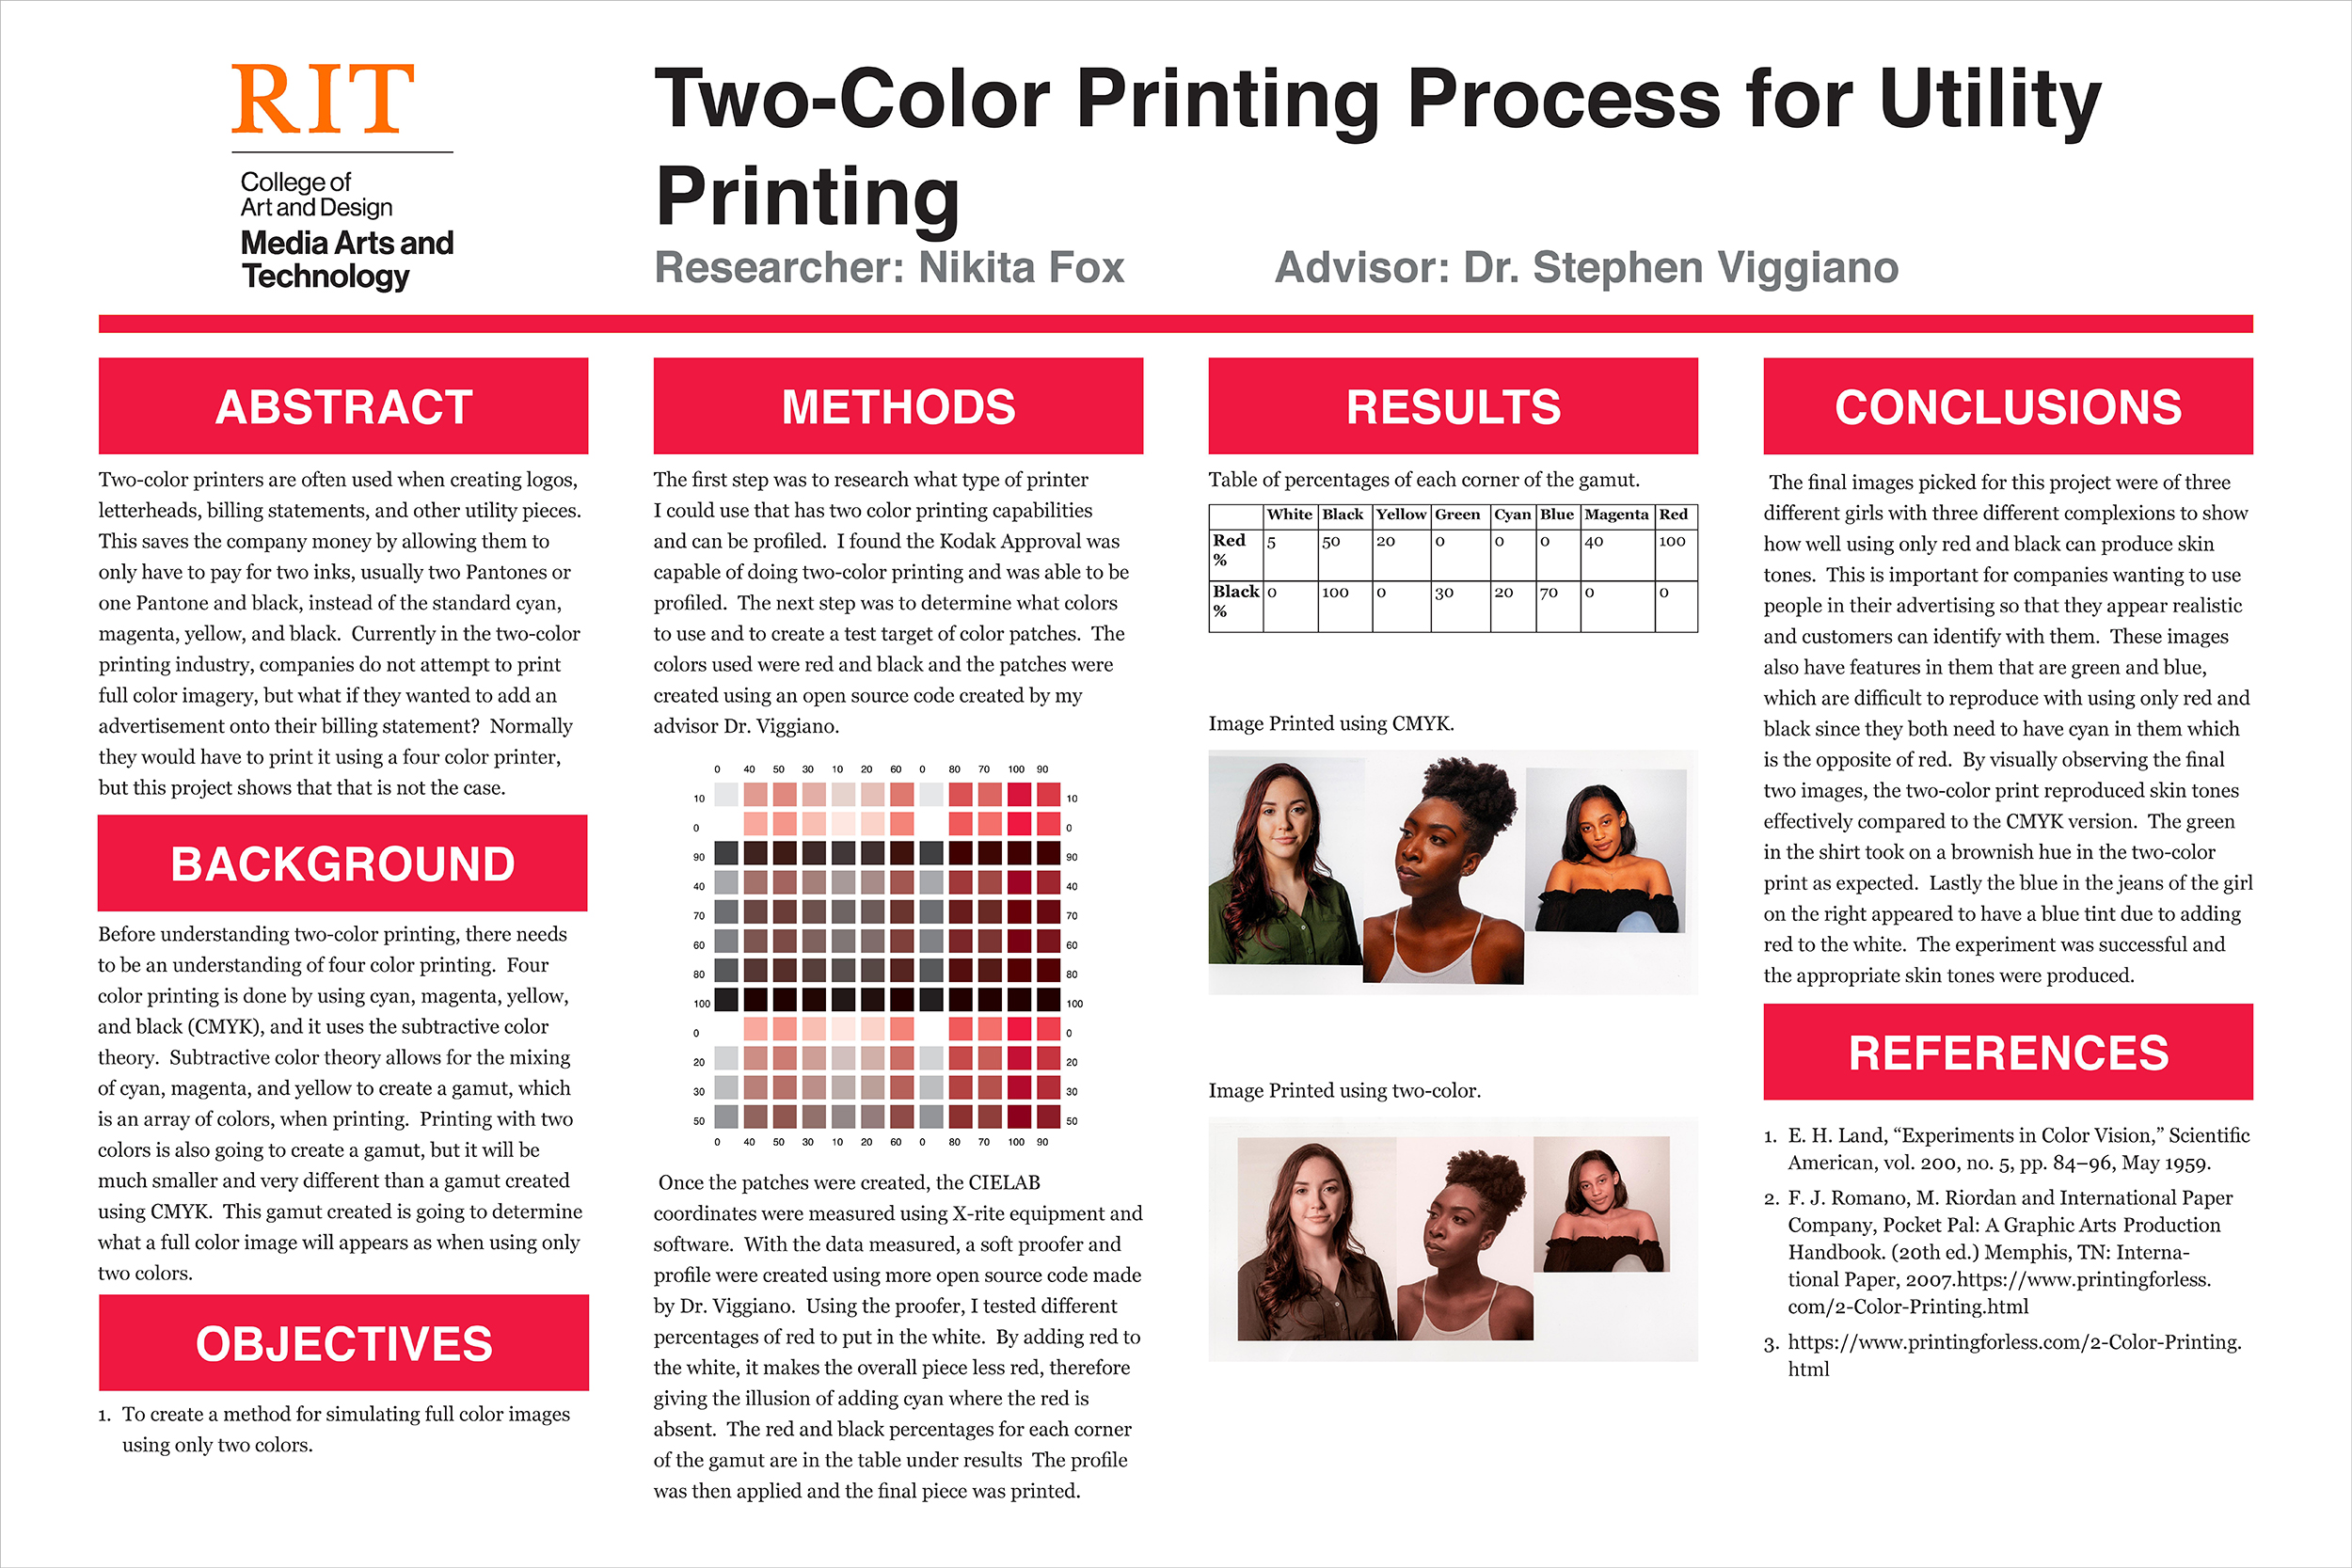 A poster showing, with text, the two-color printing process for utility printing.